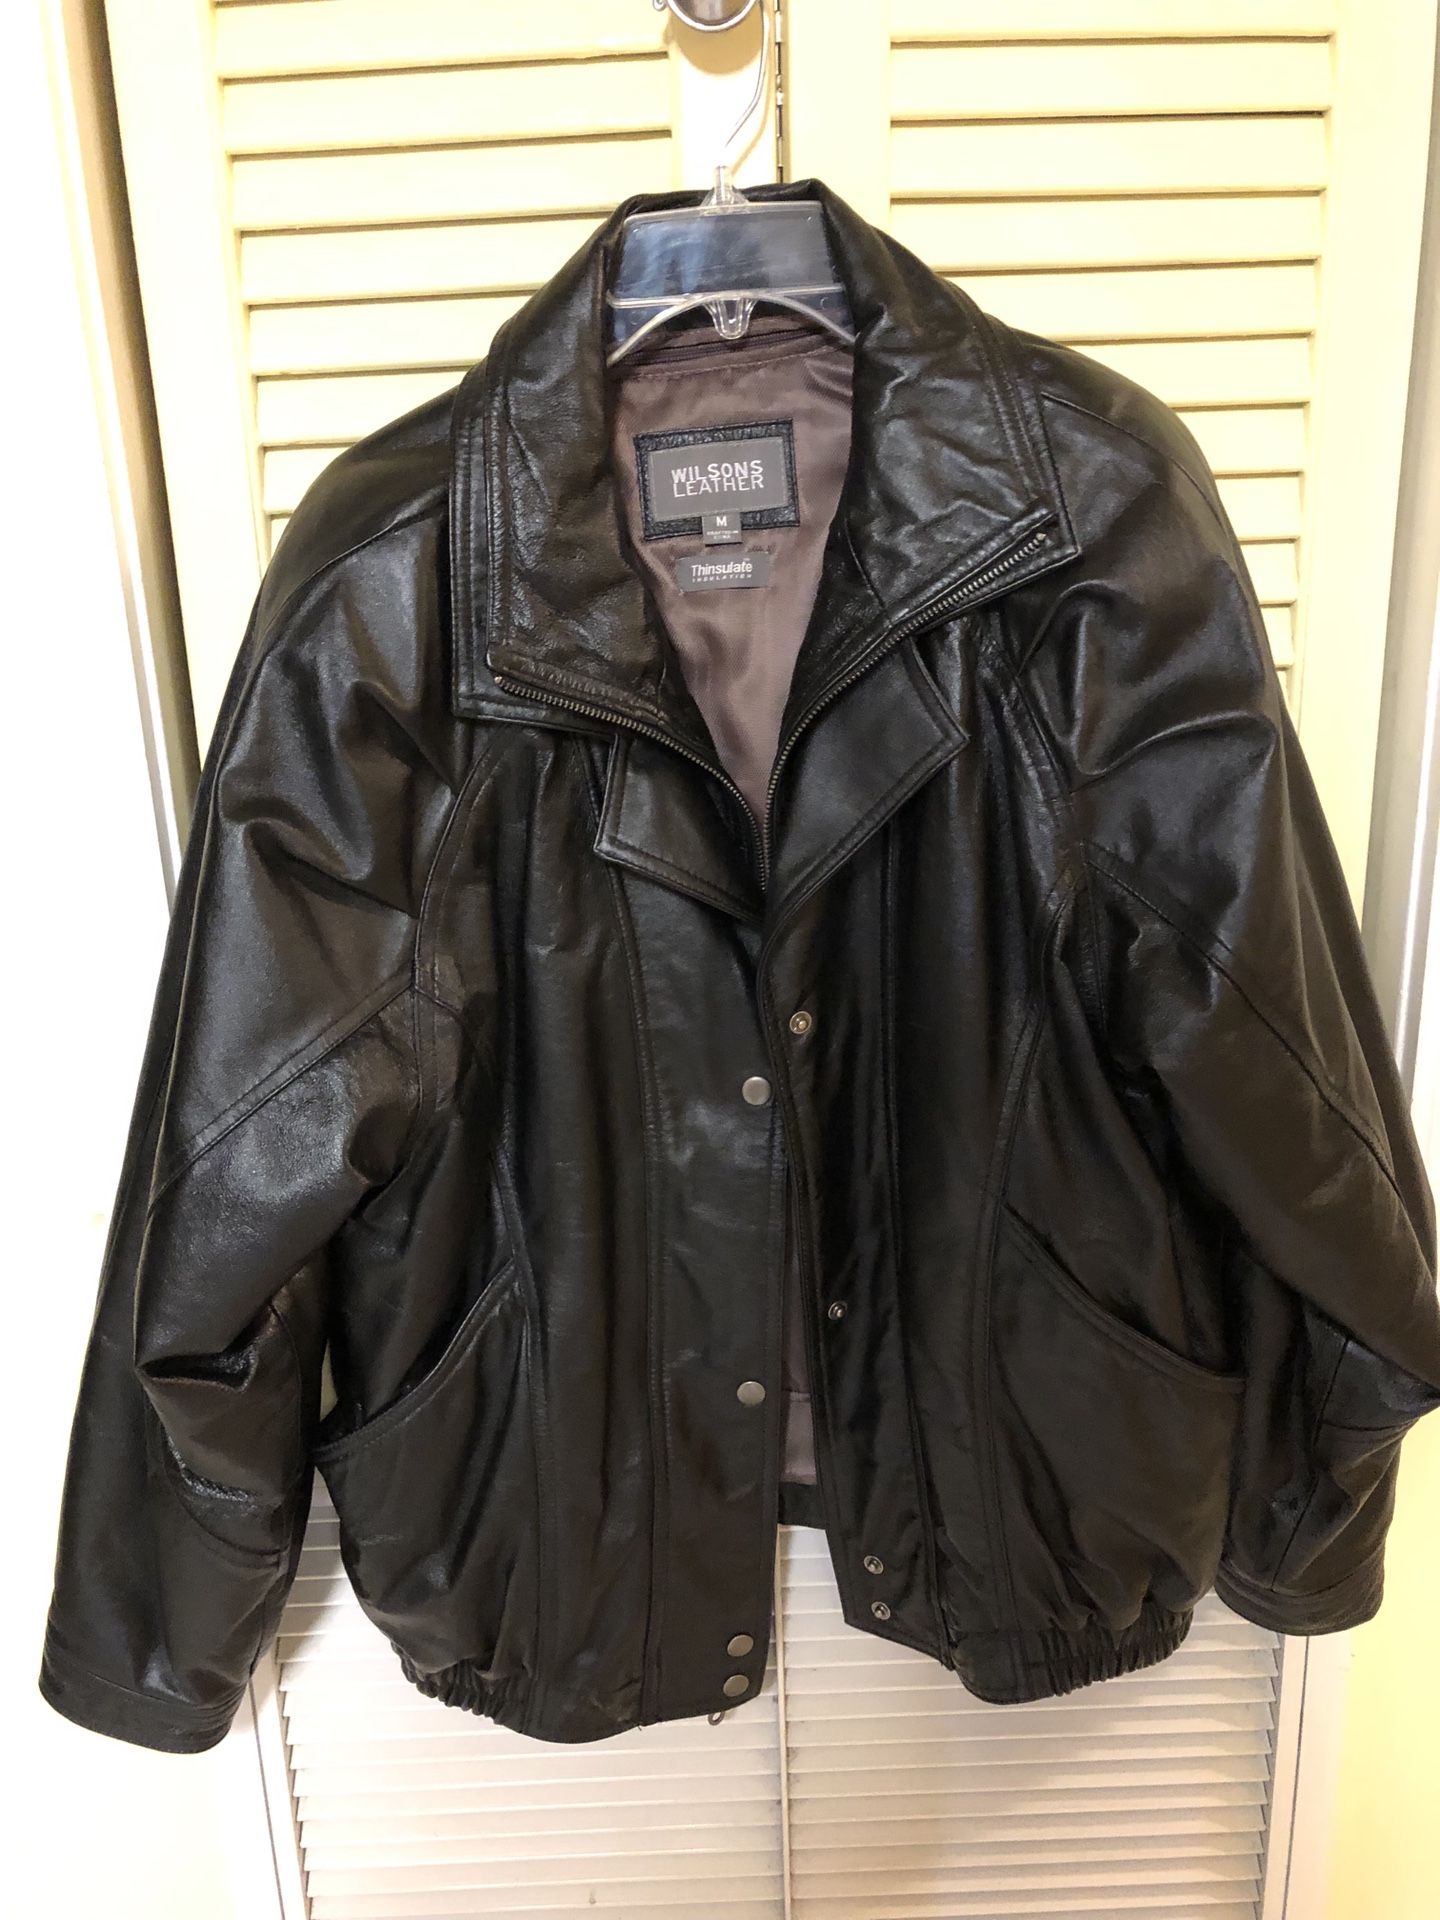 Women’s Wilson Leather motorcycle jacket. Harley patch